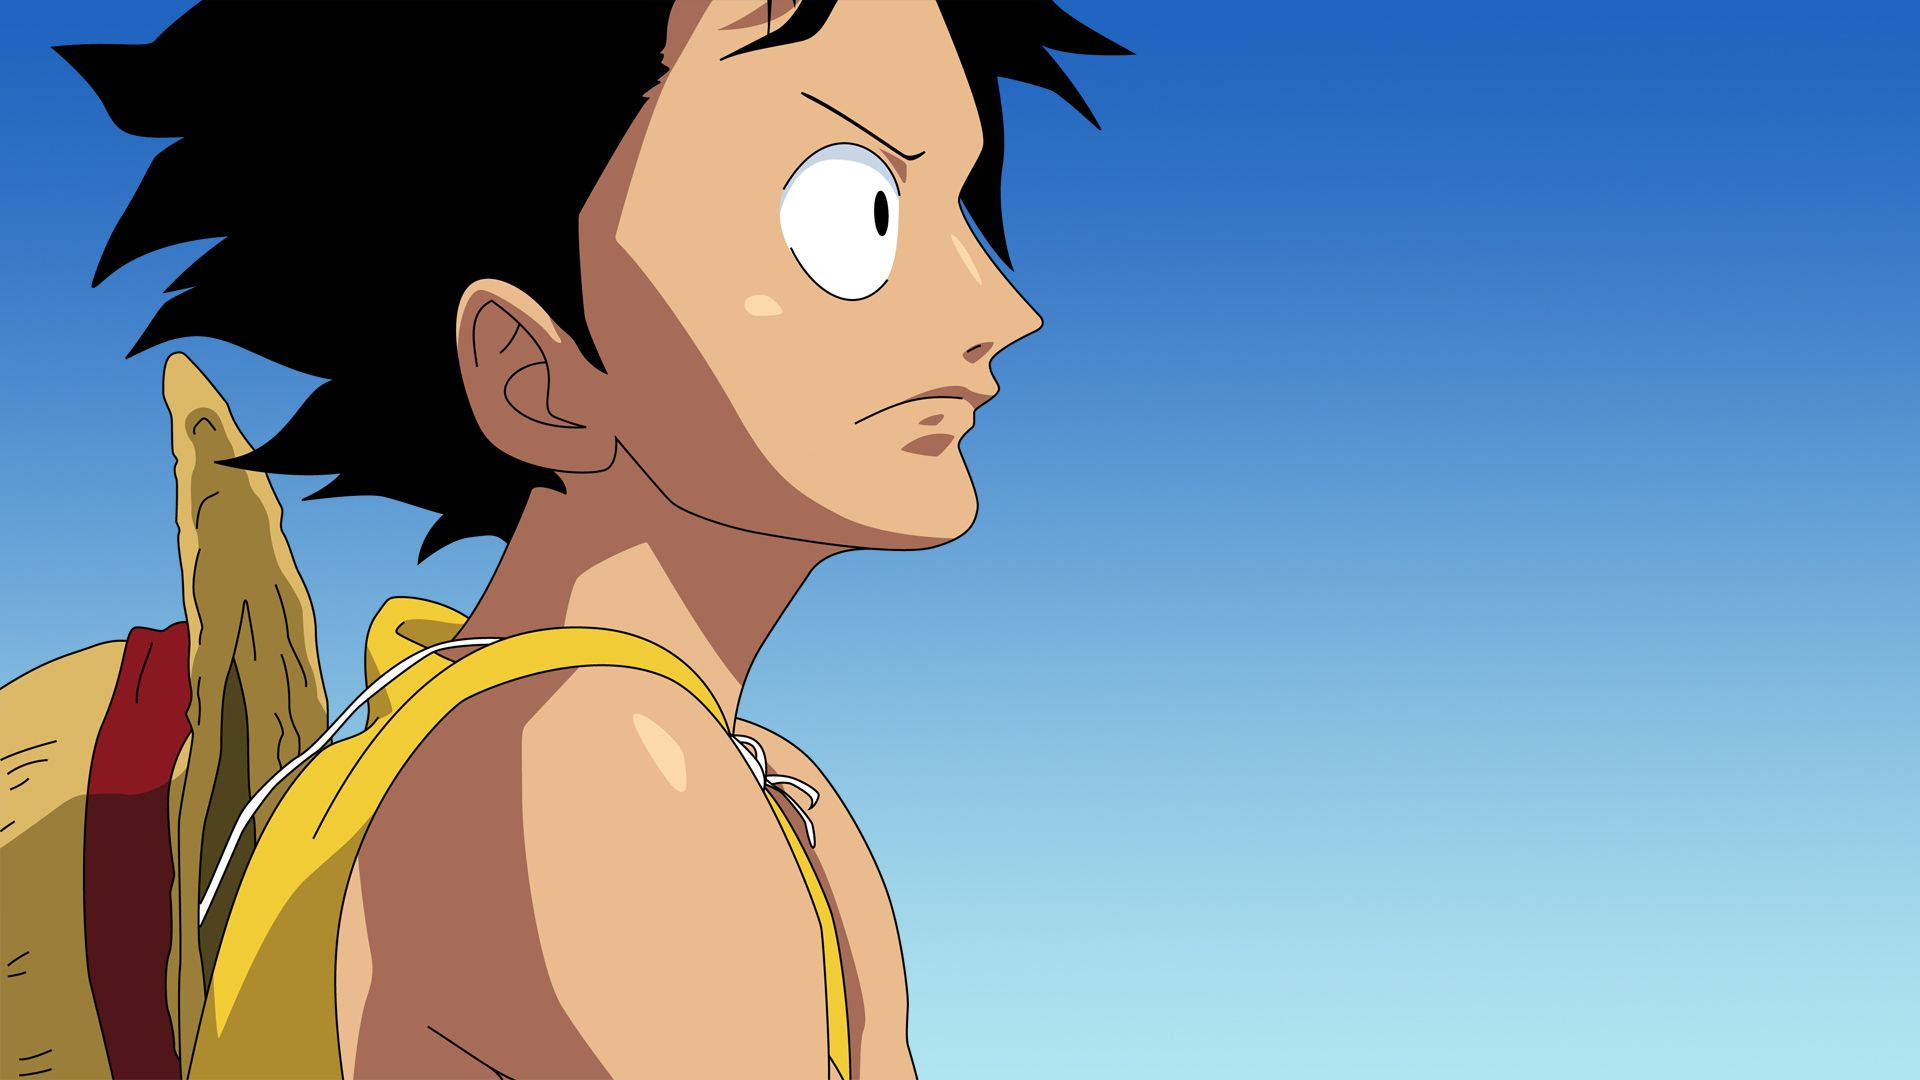 Simple Monkey D Luffy side view angle One Piece wallpaper.